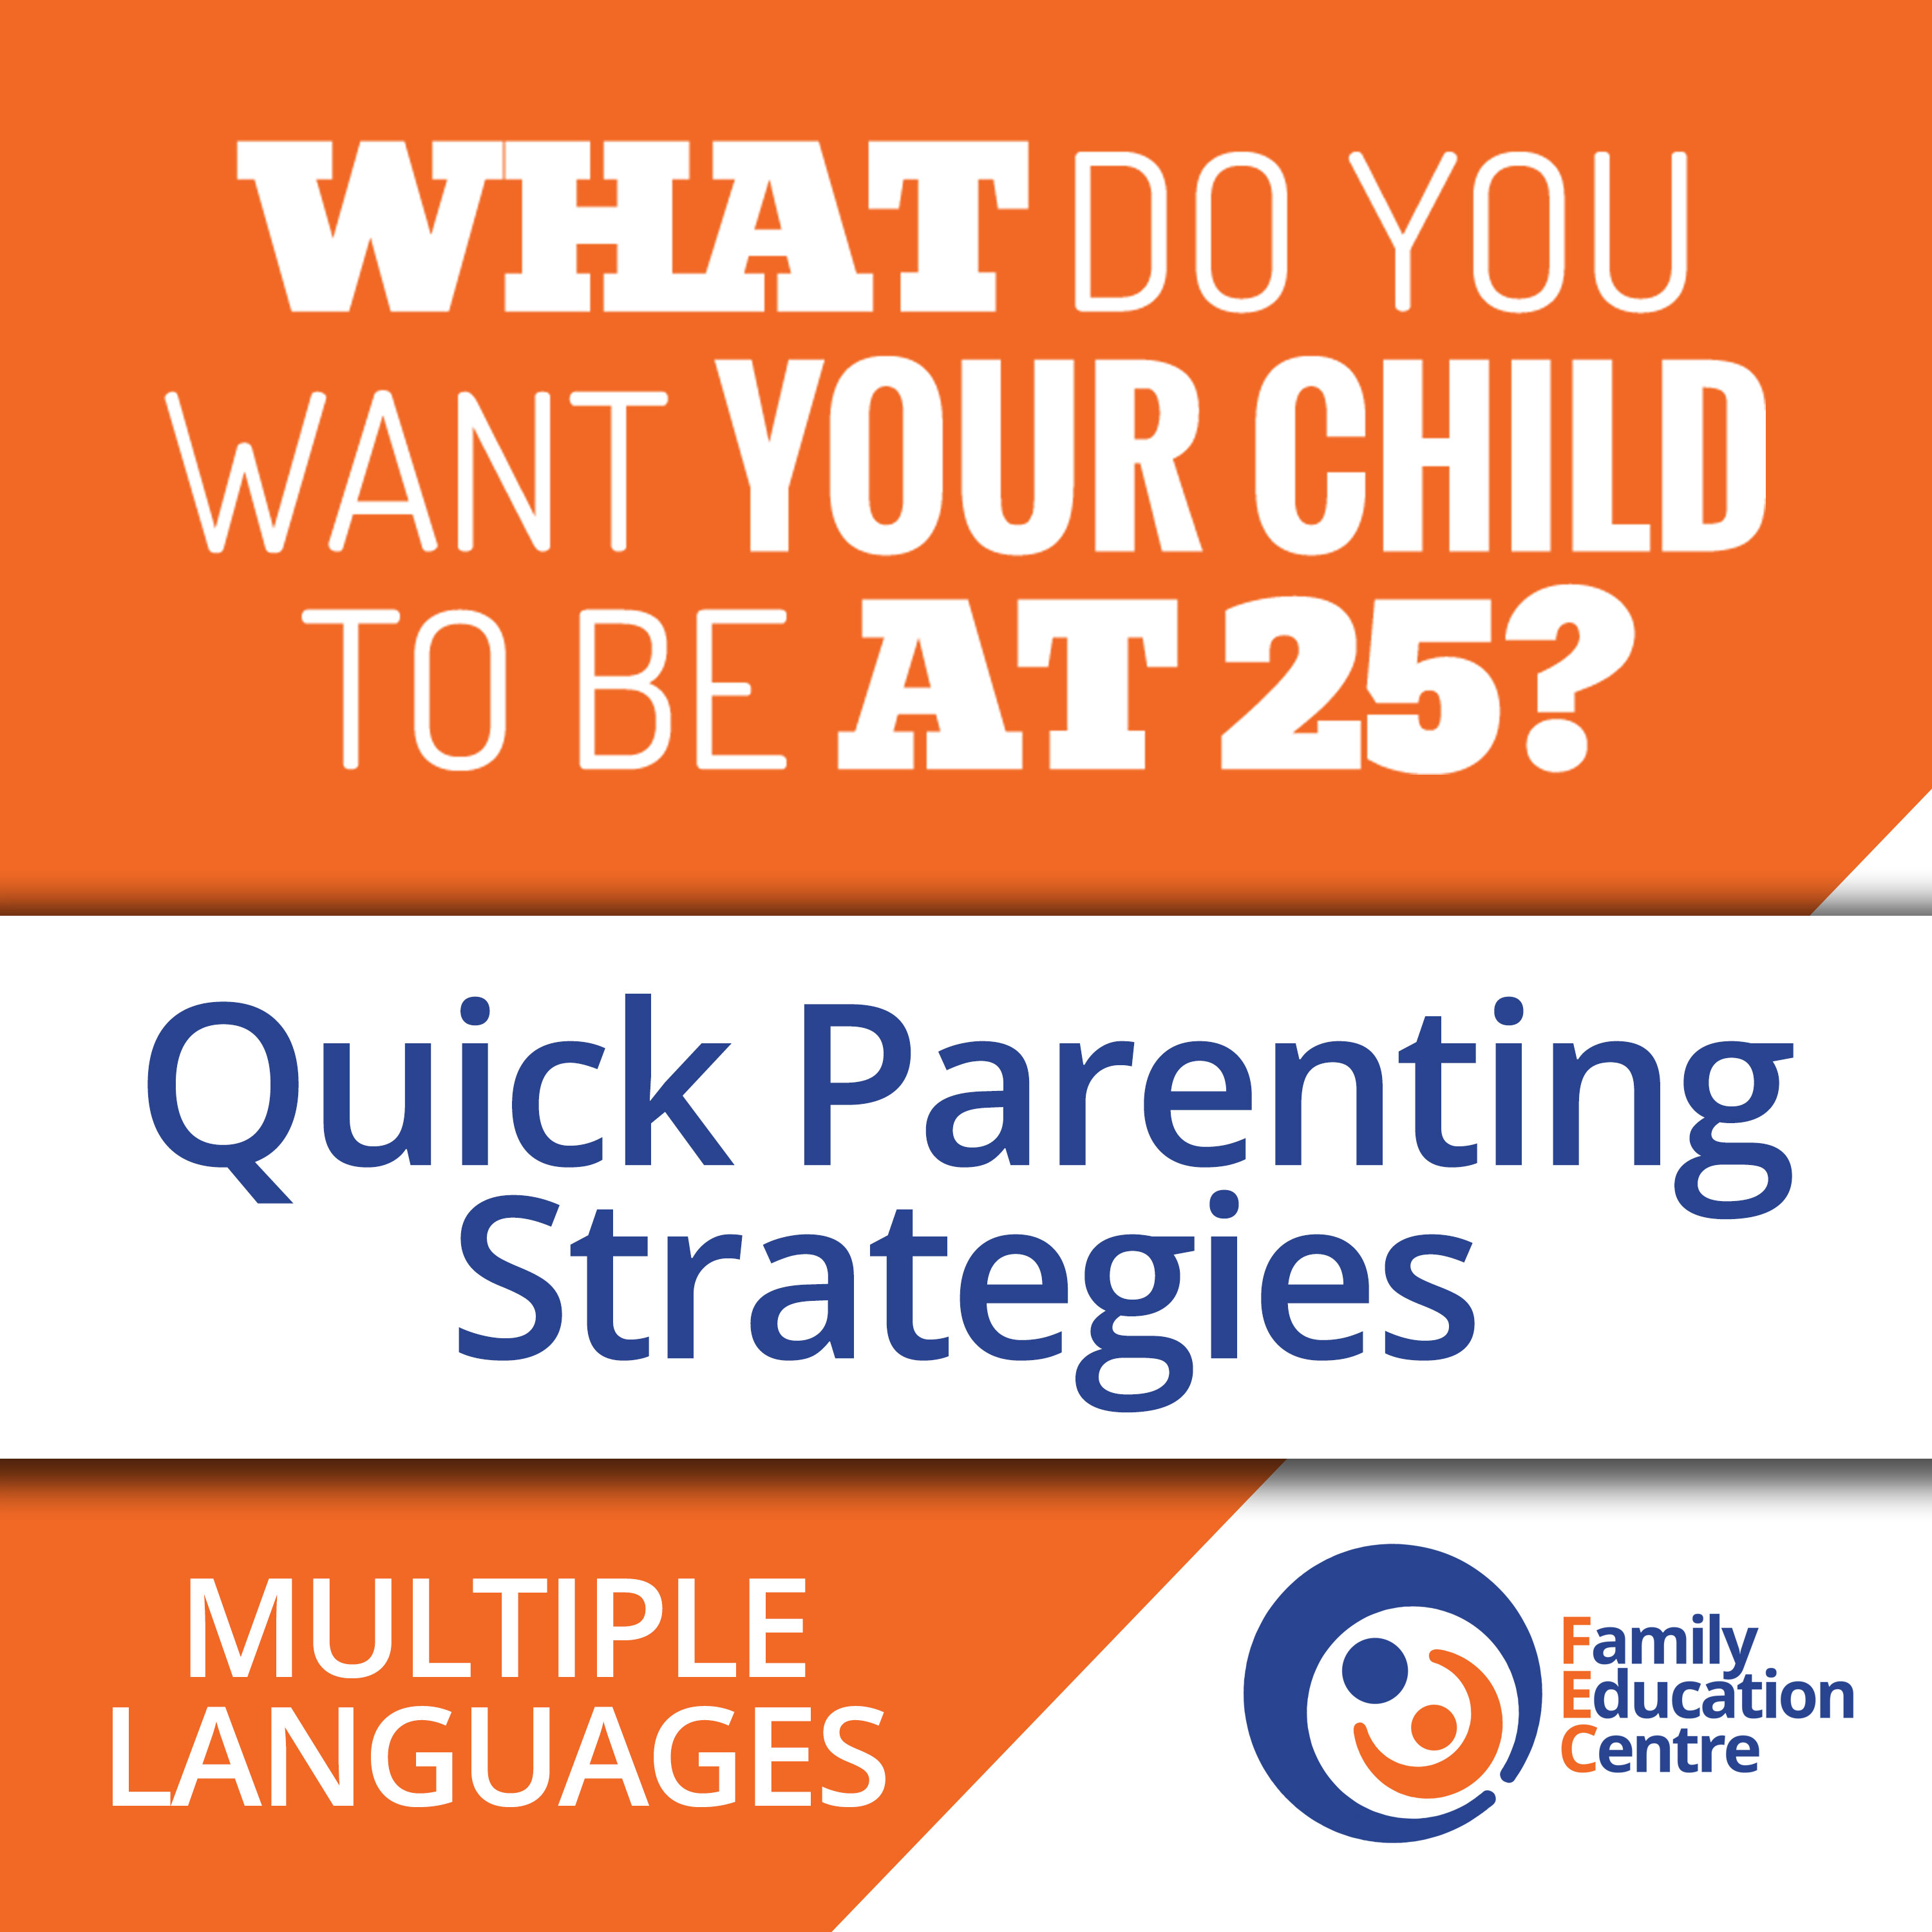 Quick Parenting Strategies...what do you want your child to be at 25? 